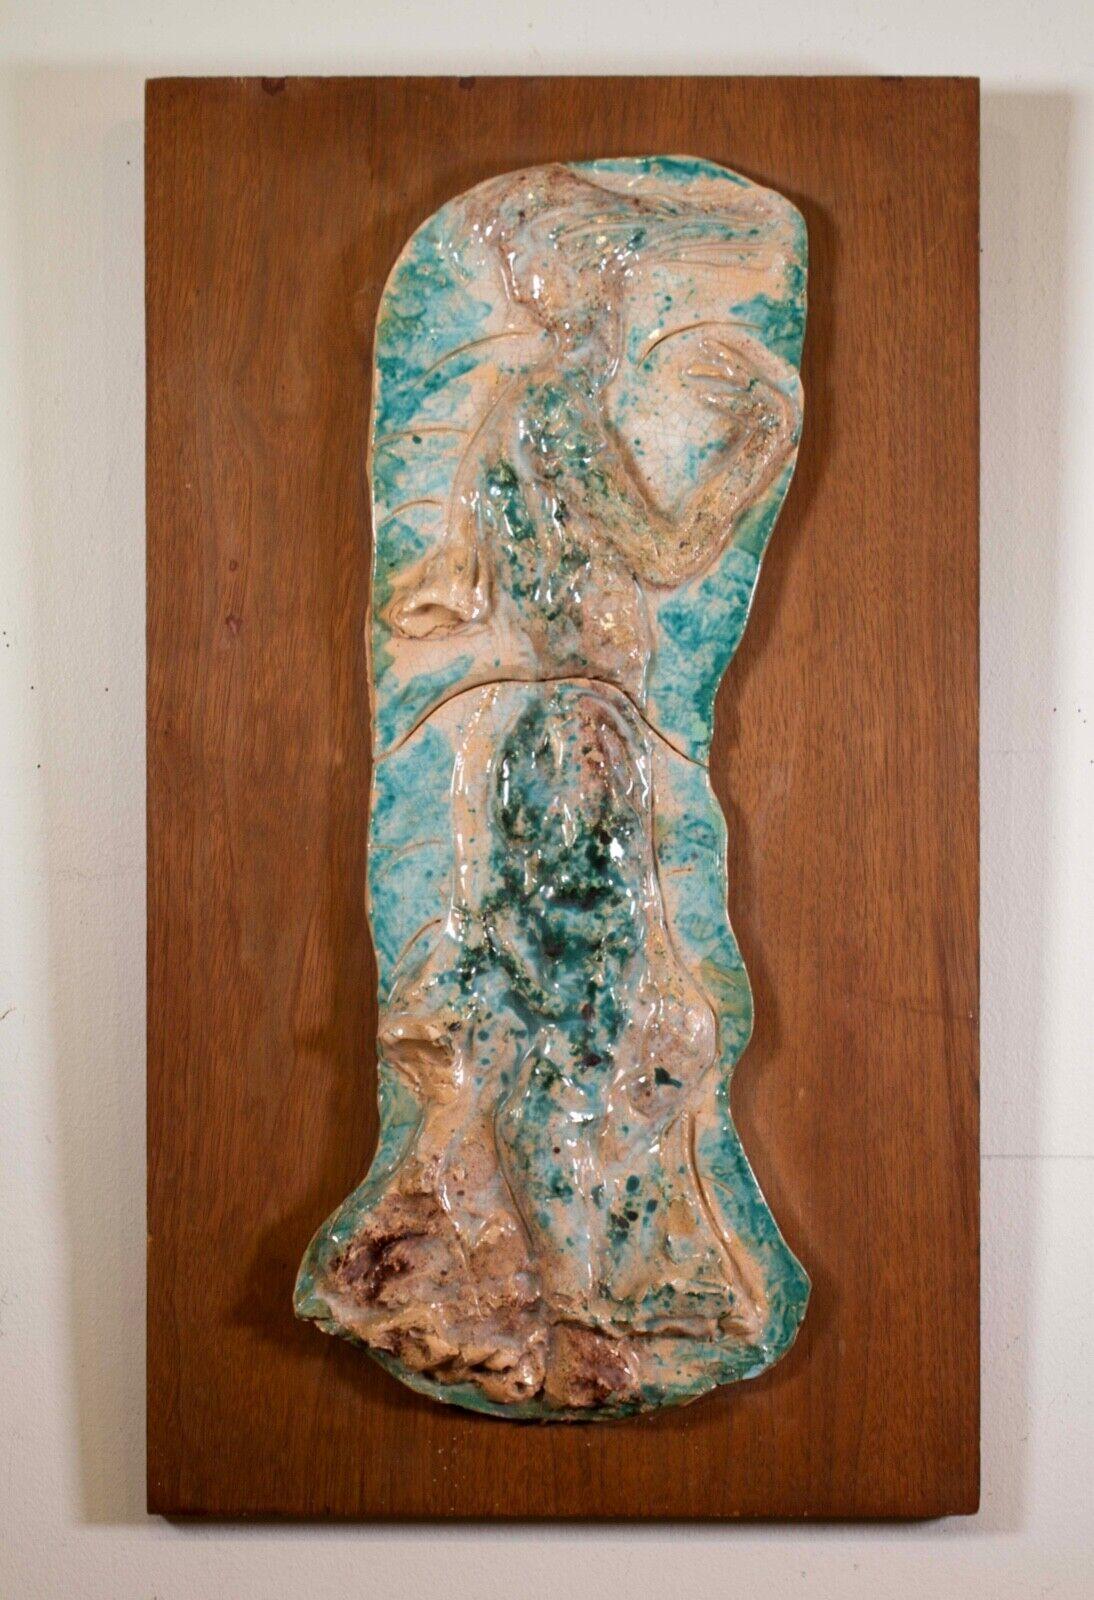 A unique modernist painted ceramic relief sculpture on board by Michigan artist Emil Weddige. A biomorphic abstract shaped ceramic and within emerges an elegant female form. Circa 1960s. Emil Weddige (1907-2001) was a painter, designer, and